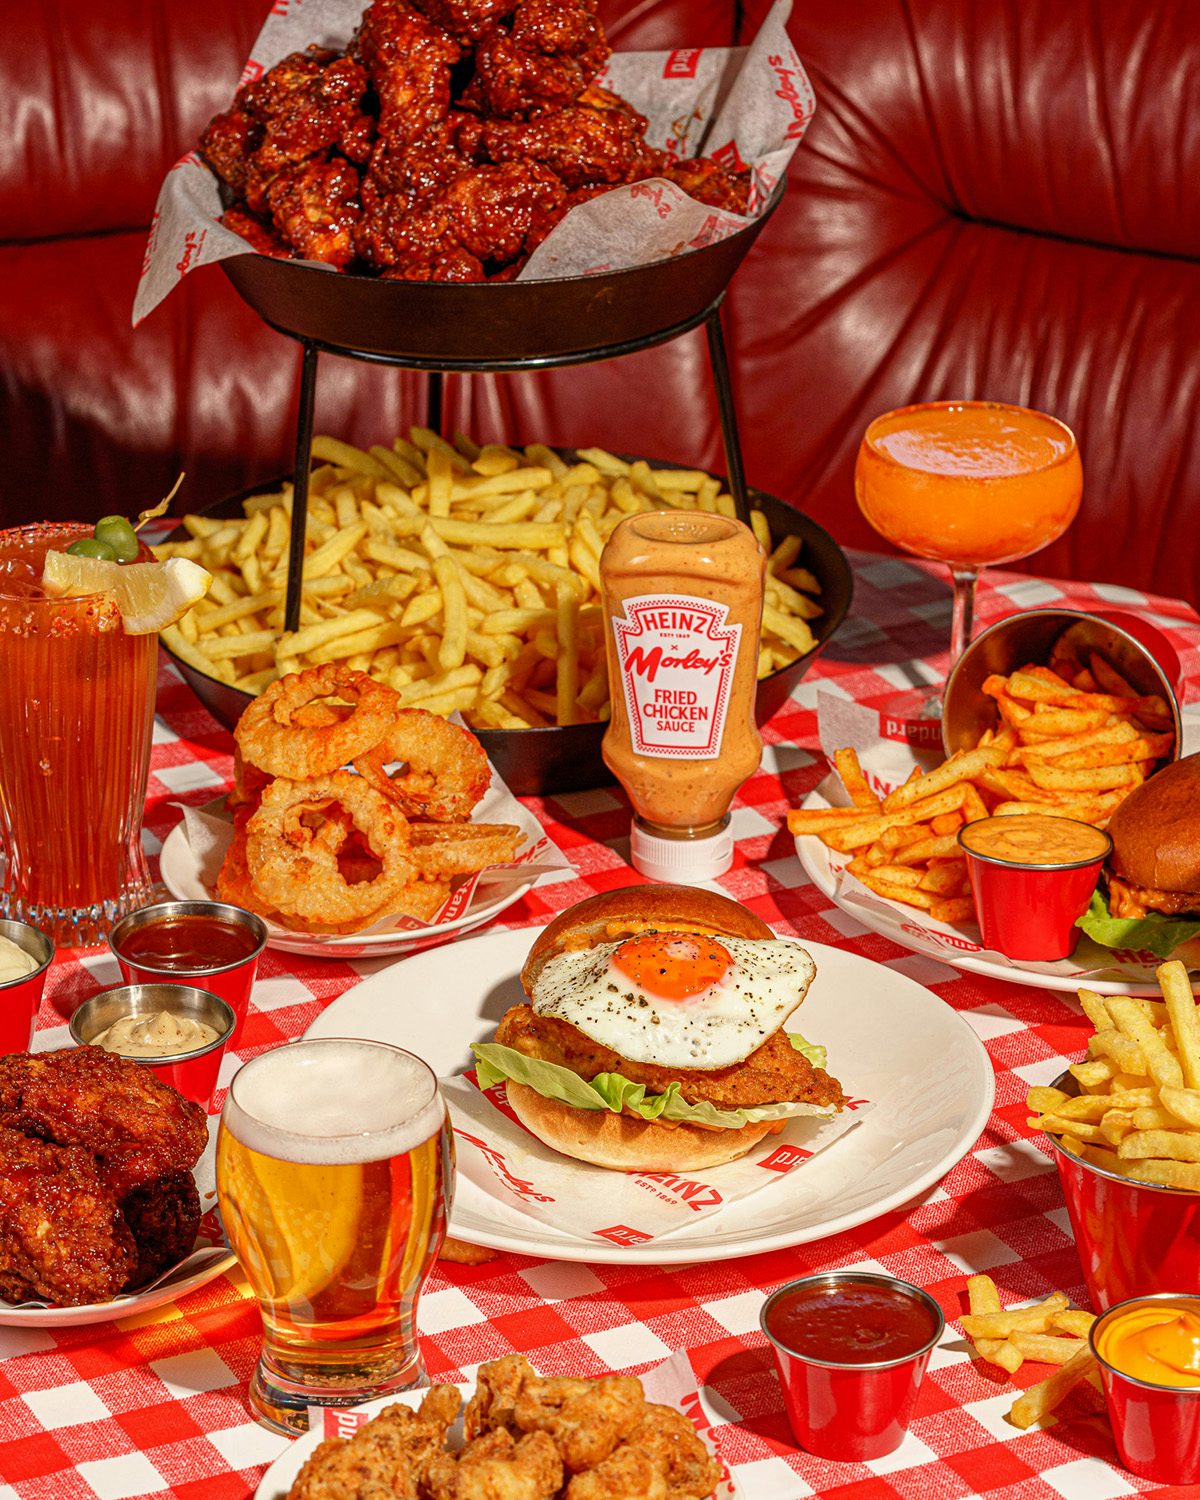 Photograph of a red gingham tablecloth covered in plates of food, including a chicken burger with an egg inside, onion rings, popcorn chicken, and chips, as well as orange cocktails and glasses of beer, as part of the Morley's and Heinz collaboration